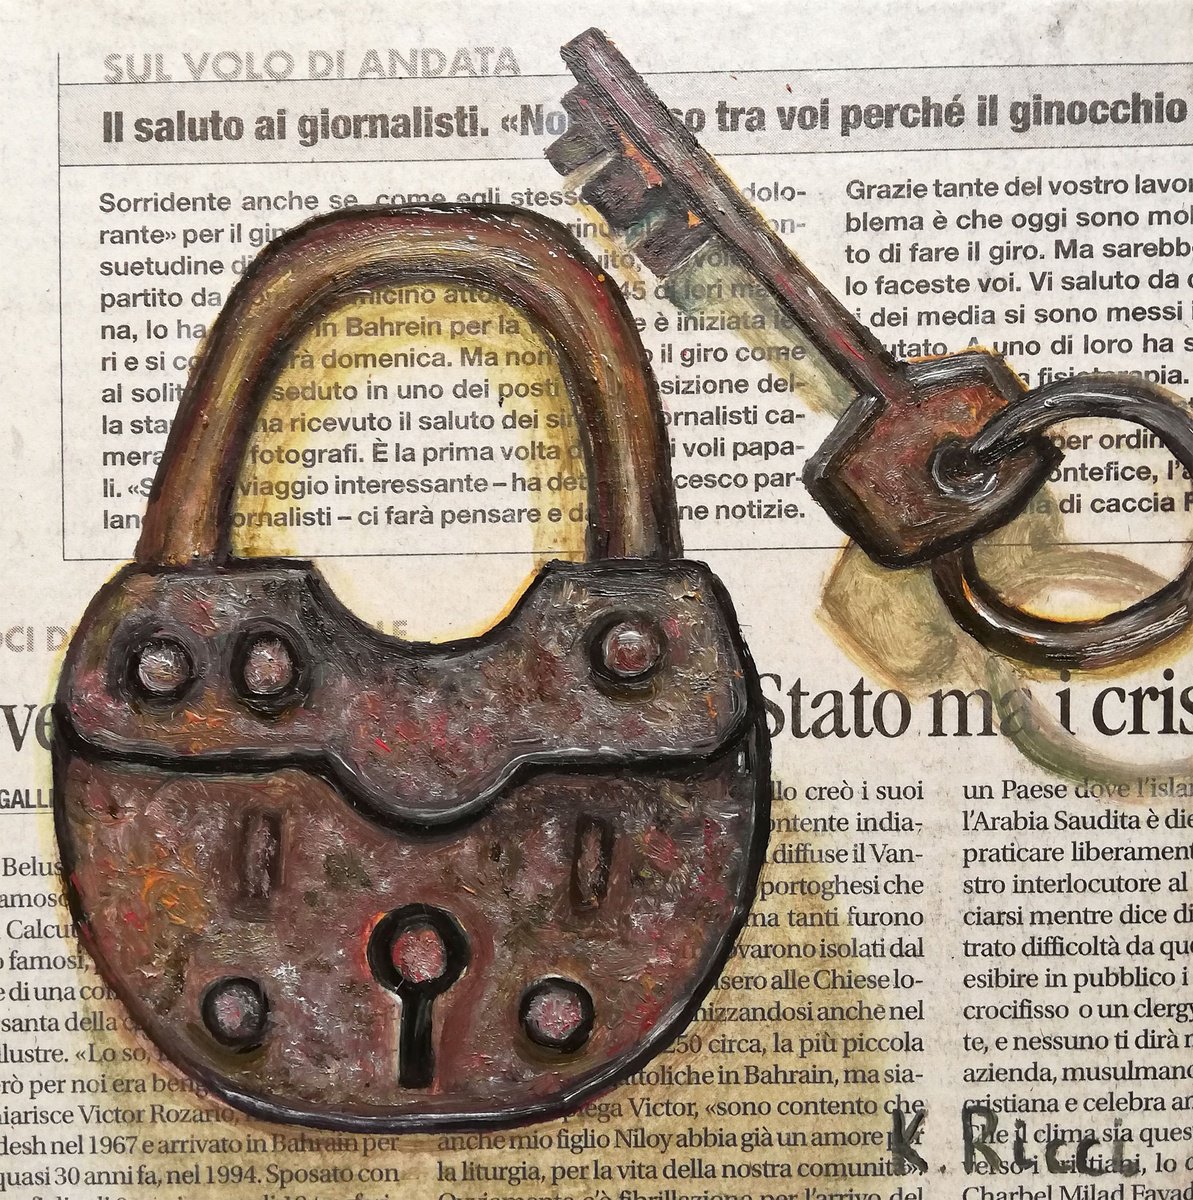 Padlock on Newspaper Original Oil on Canvas Painting 6 by 6 inches (15x15x0.7 cm) by Katia Ricci